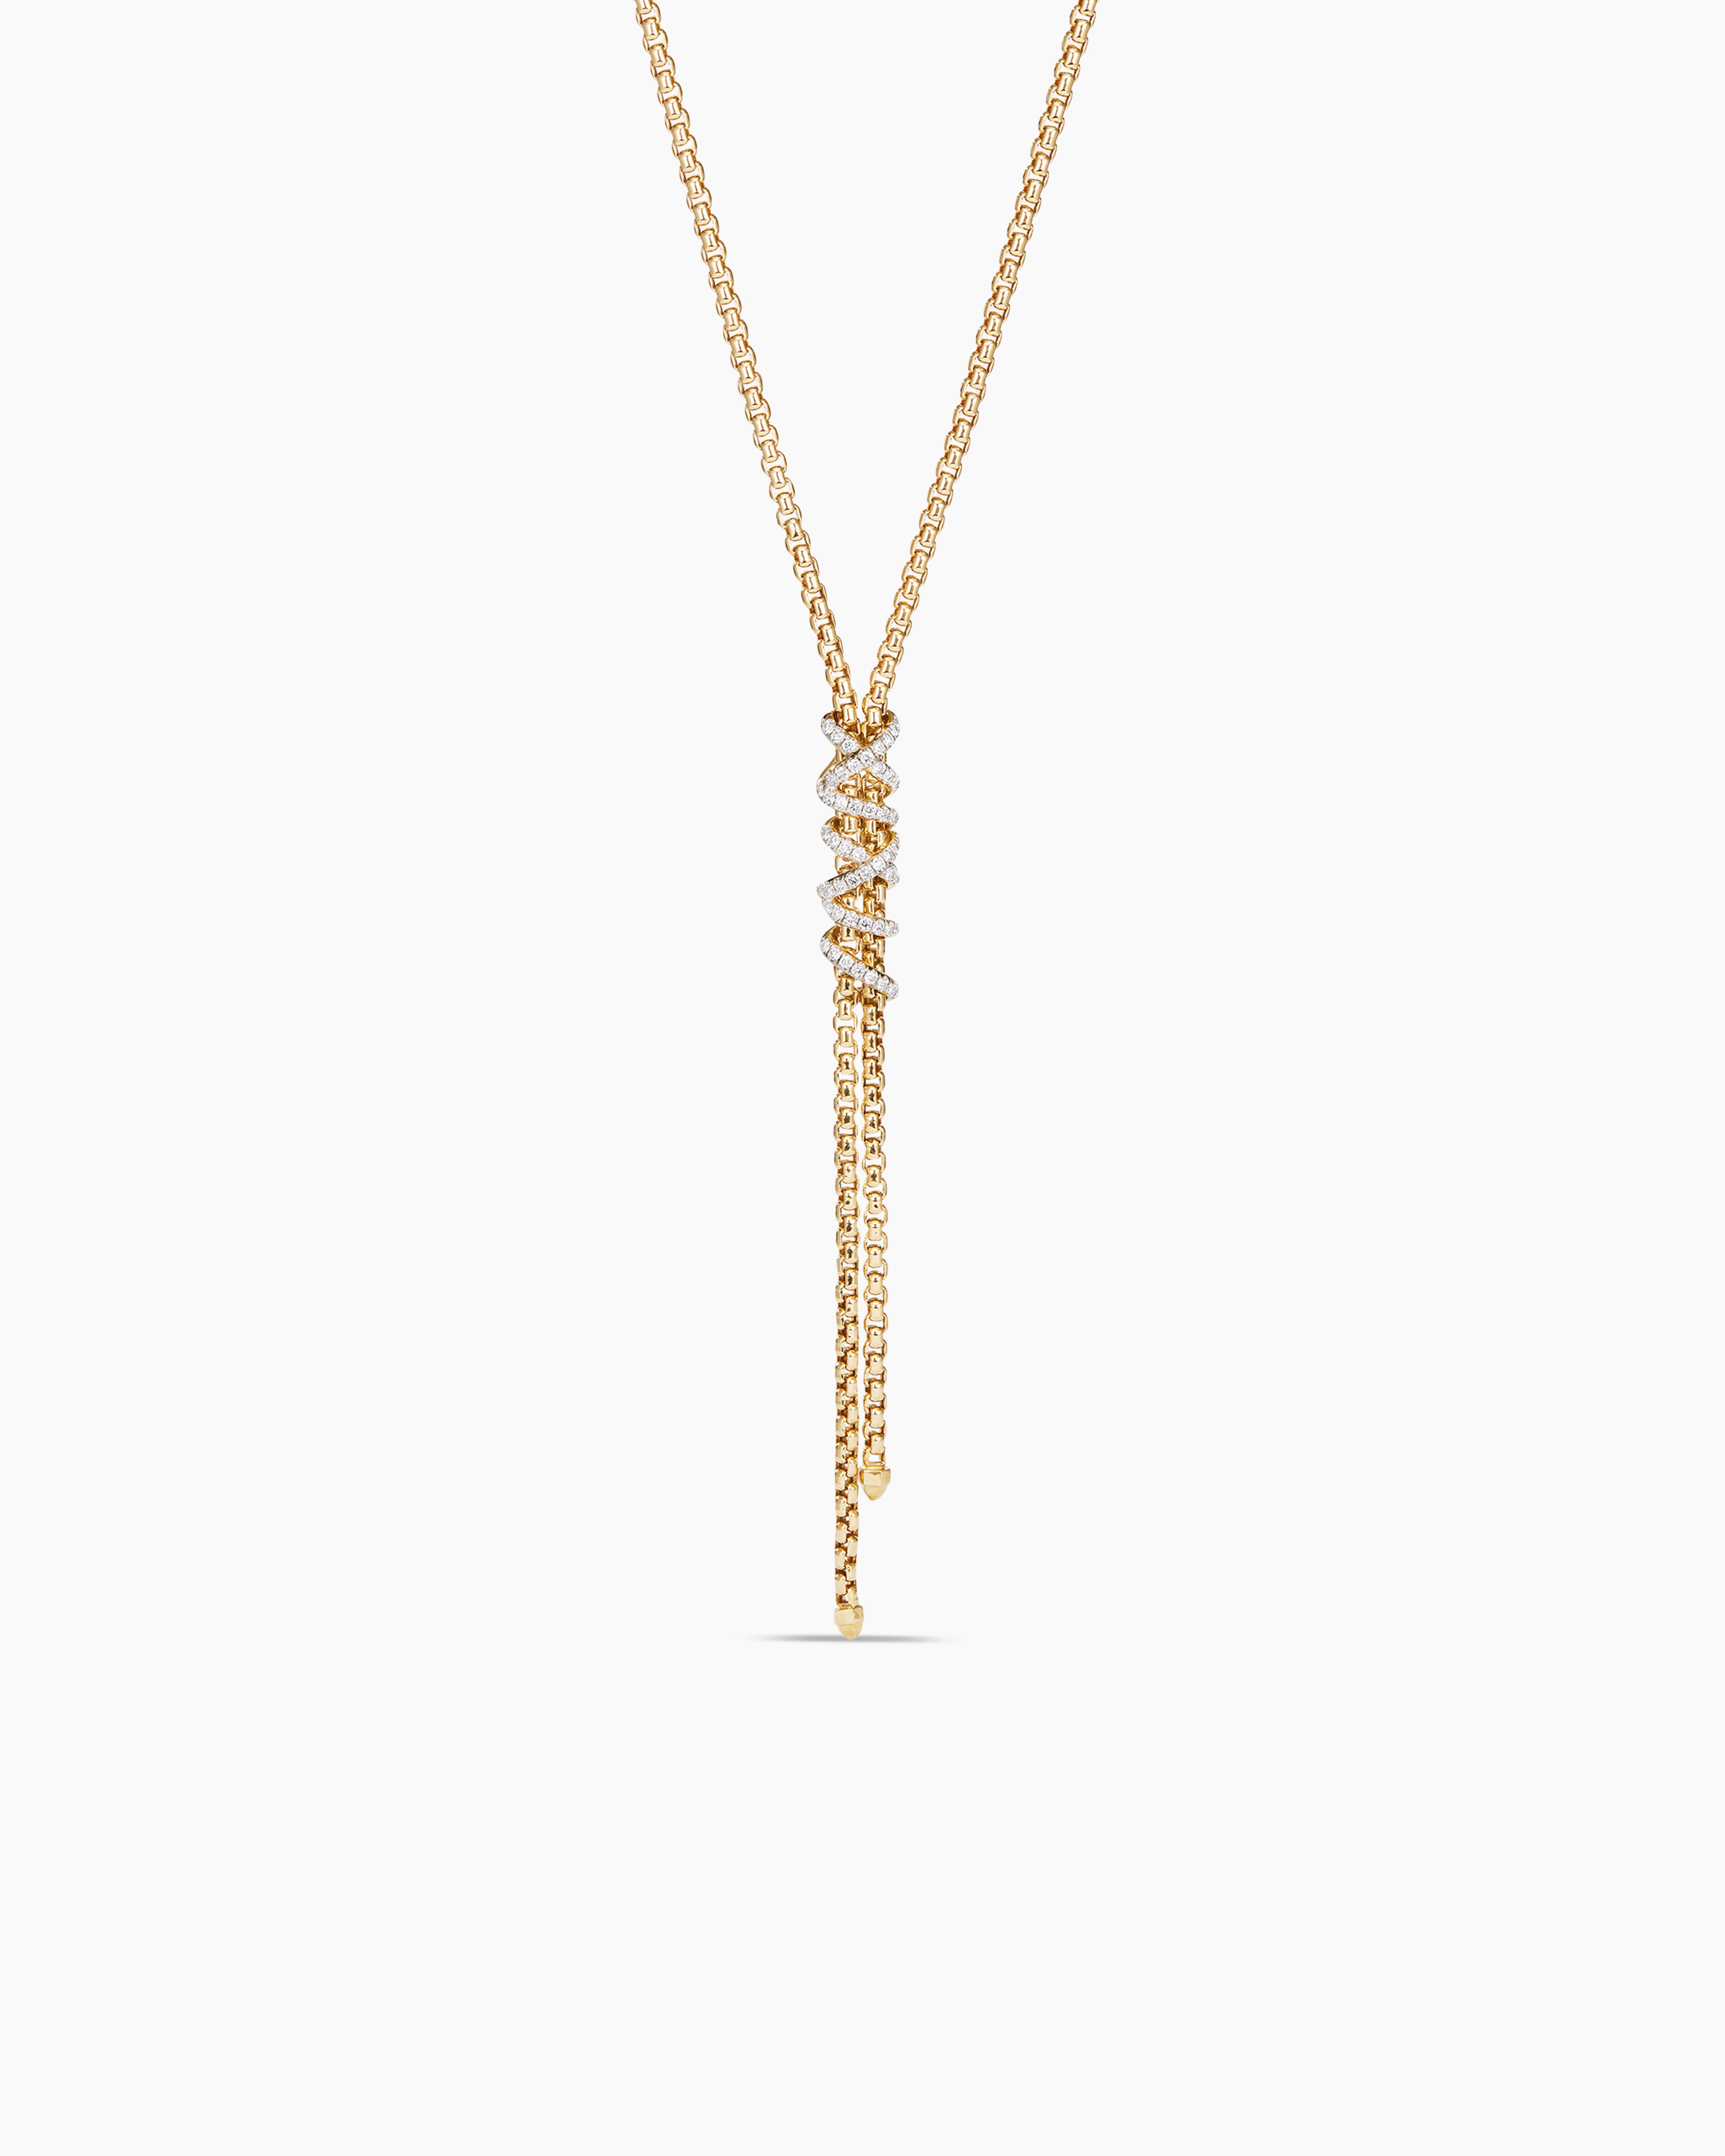 Long Y Necklace Wrap Around Necklace Gold Necklace Lariat Necklace